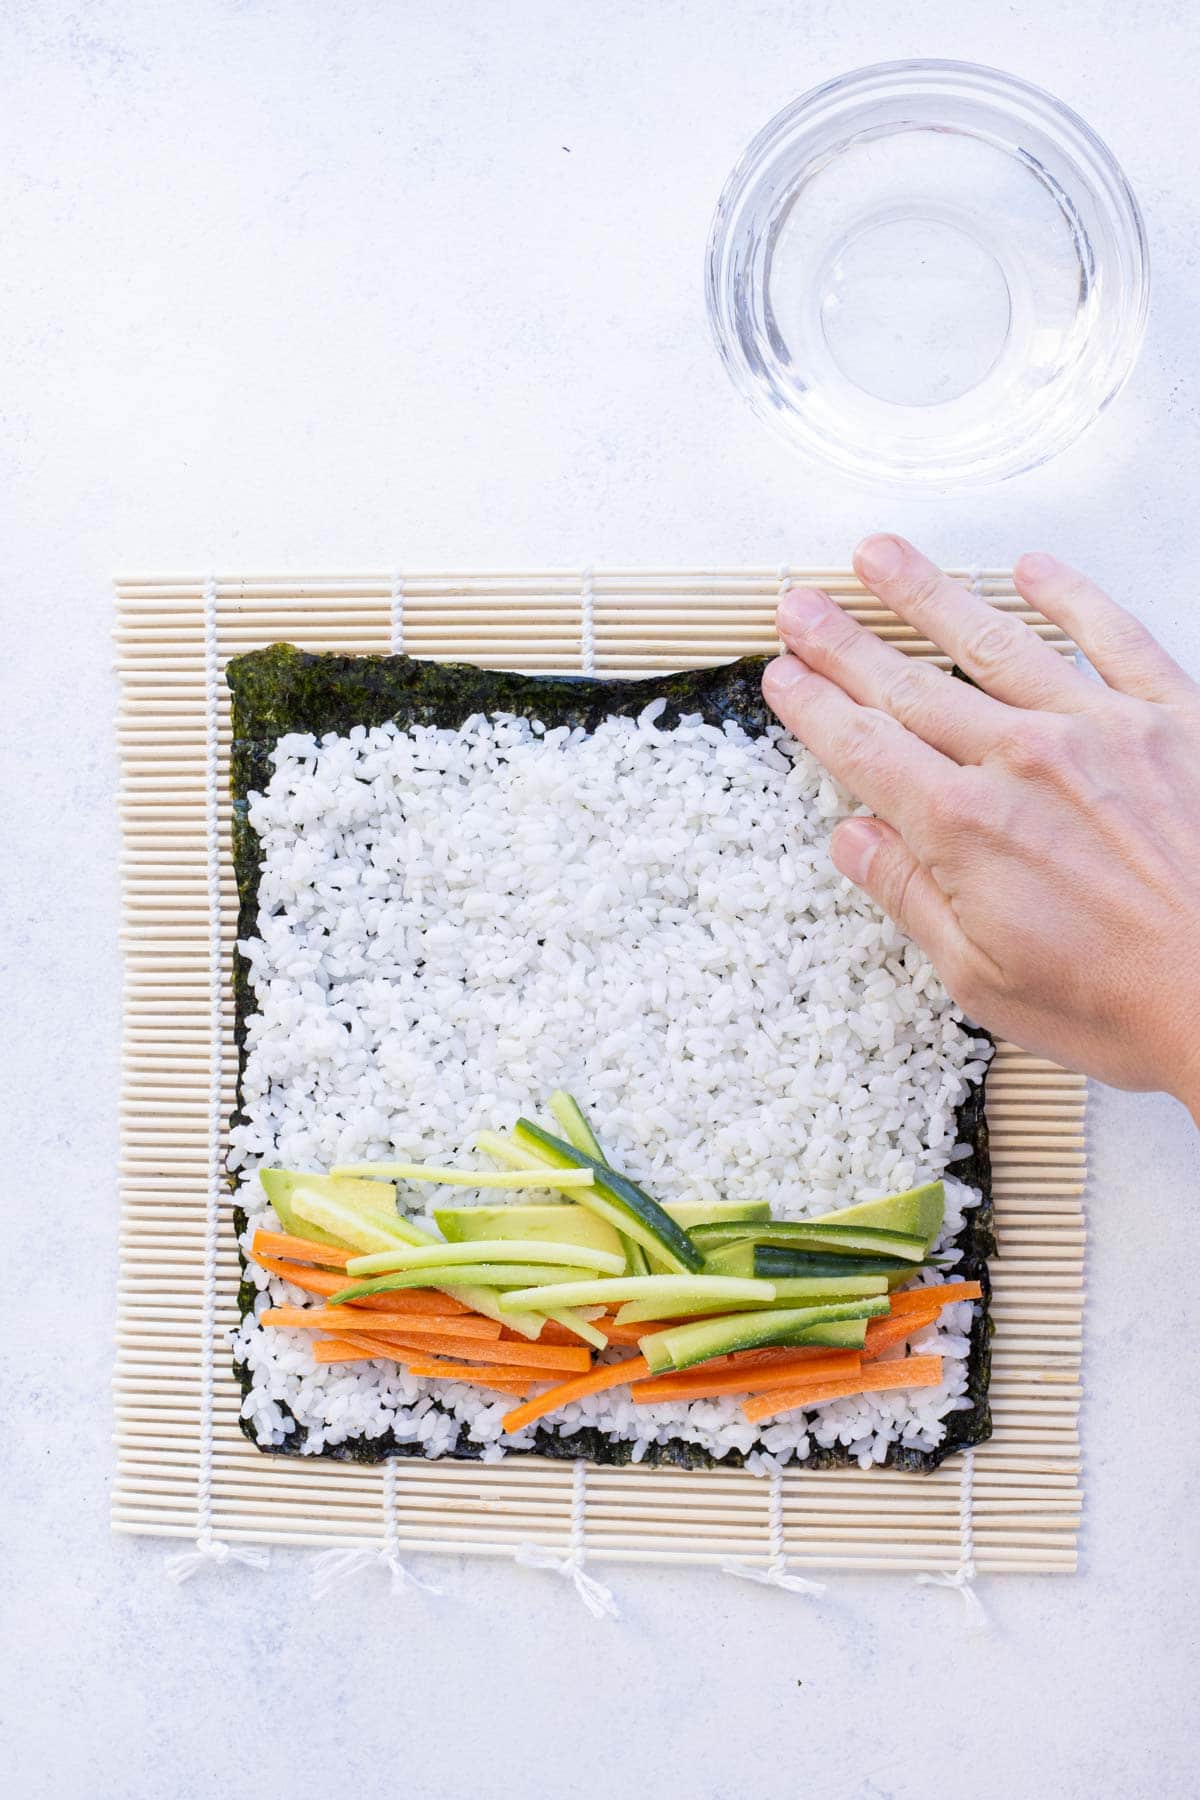 A hand is used to wet the edge of the nori roll.